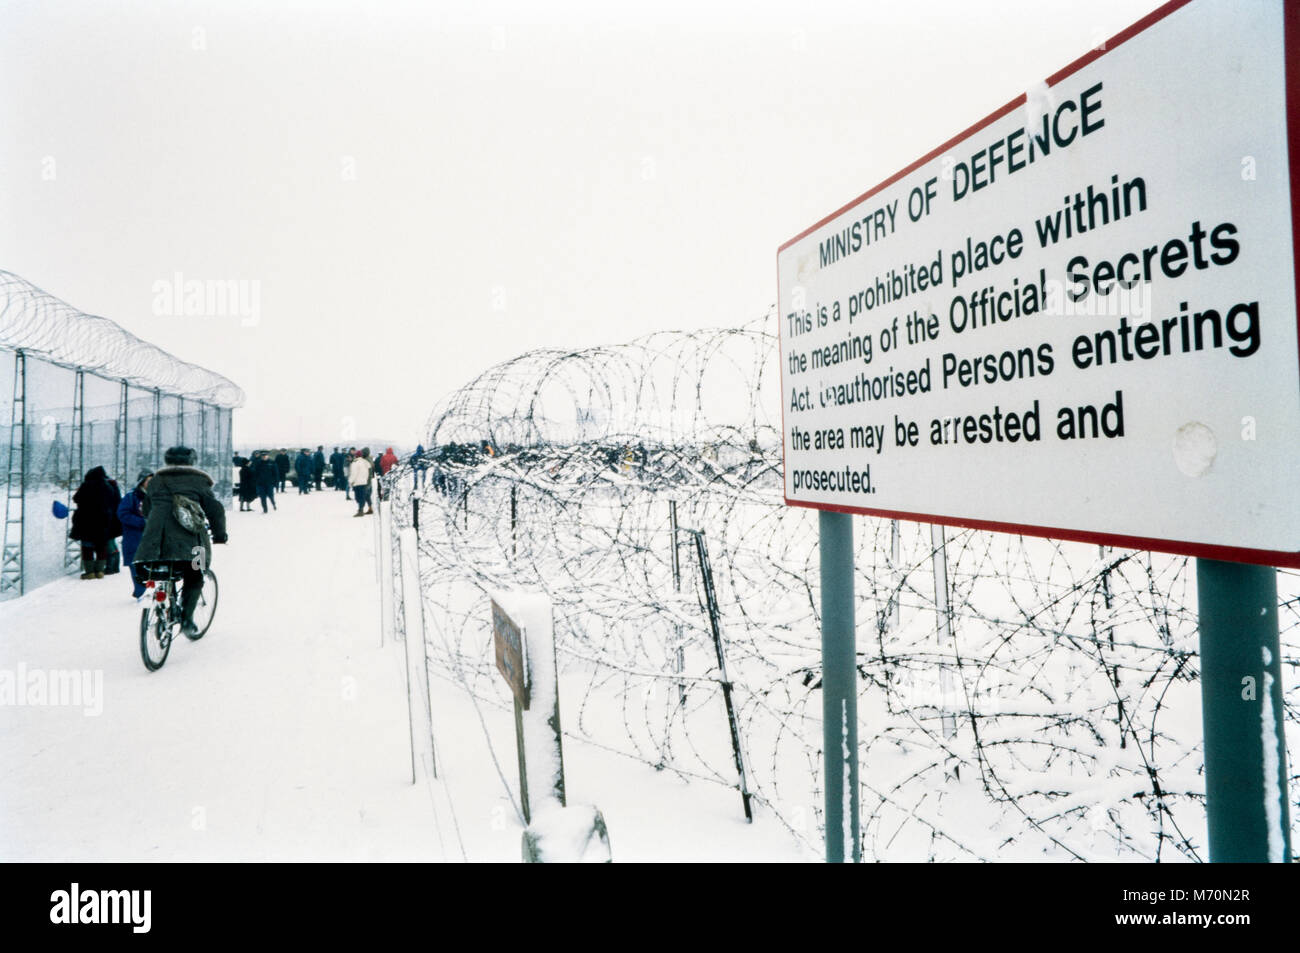 Ministry of Defence warning sign at site of Anti cruise missile demonstration at the Molesworth missile base on 2nd February 1986 in snowy conditions. Cambridgeshire, England, UK, archival photograph, Stock Photo